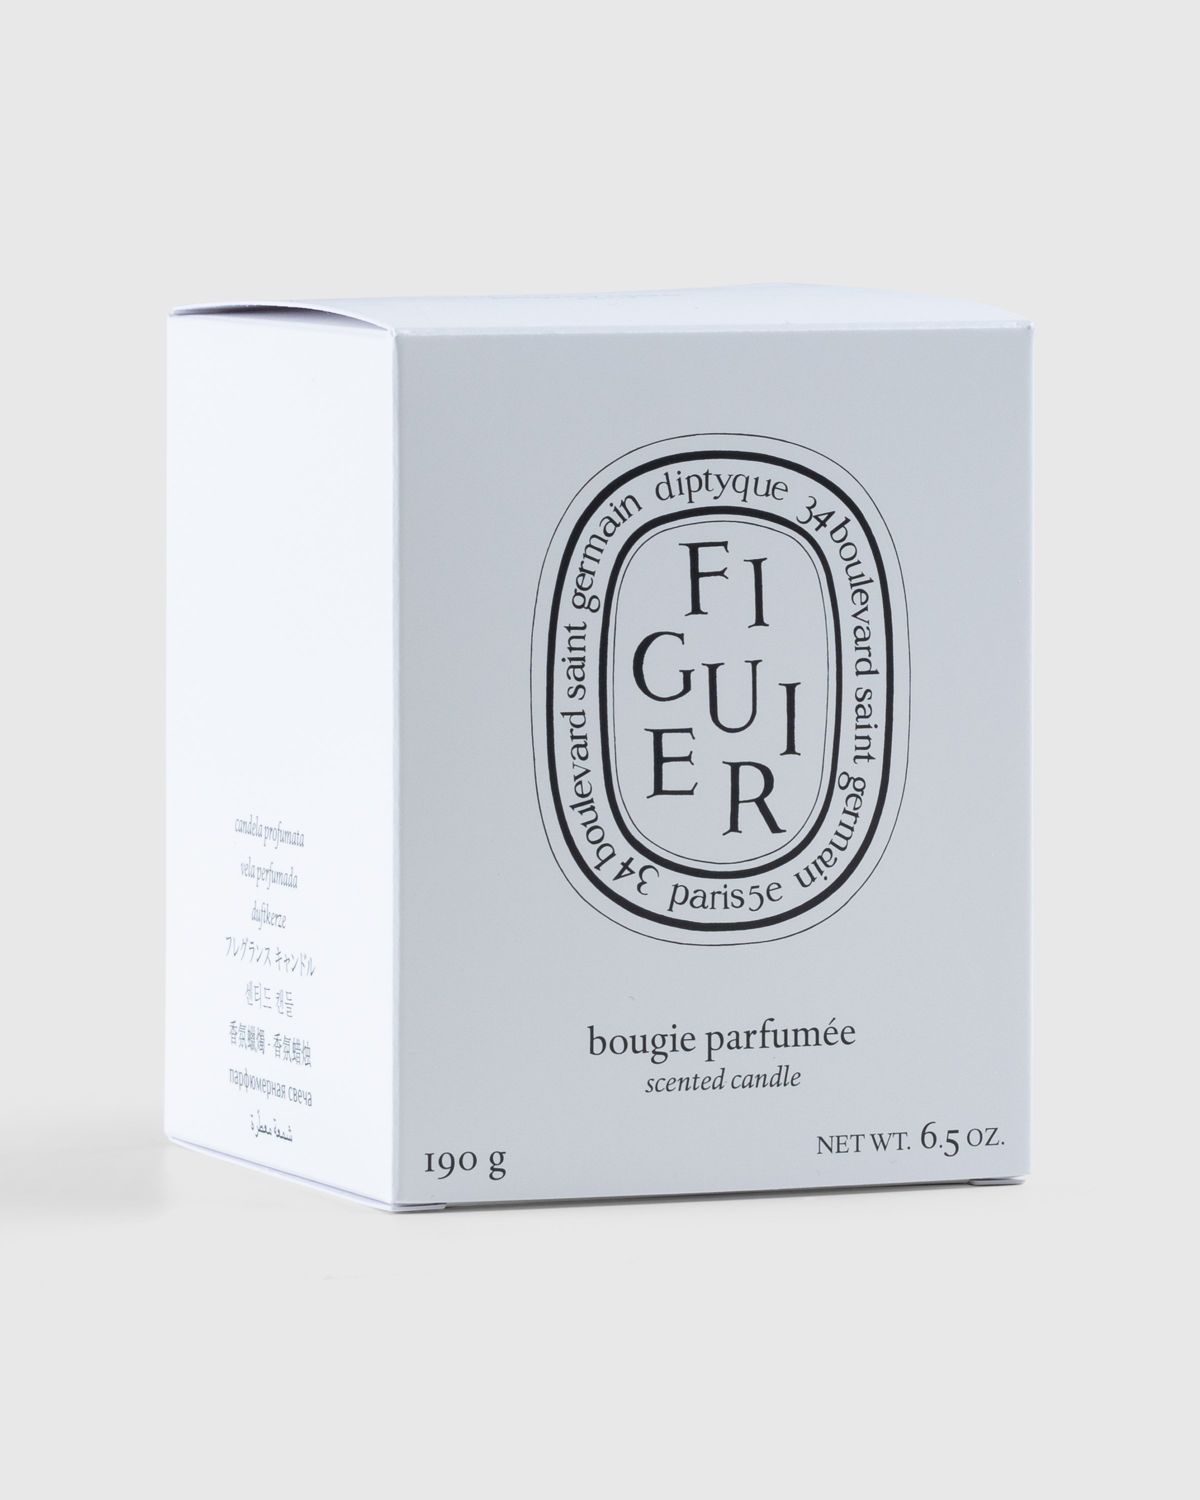 Diptyque – Standard Candle Figuier 190g - Candles & Fragrances - White - Image 3